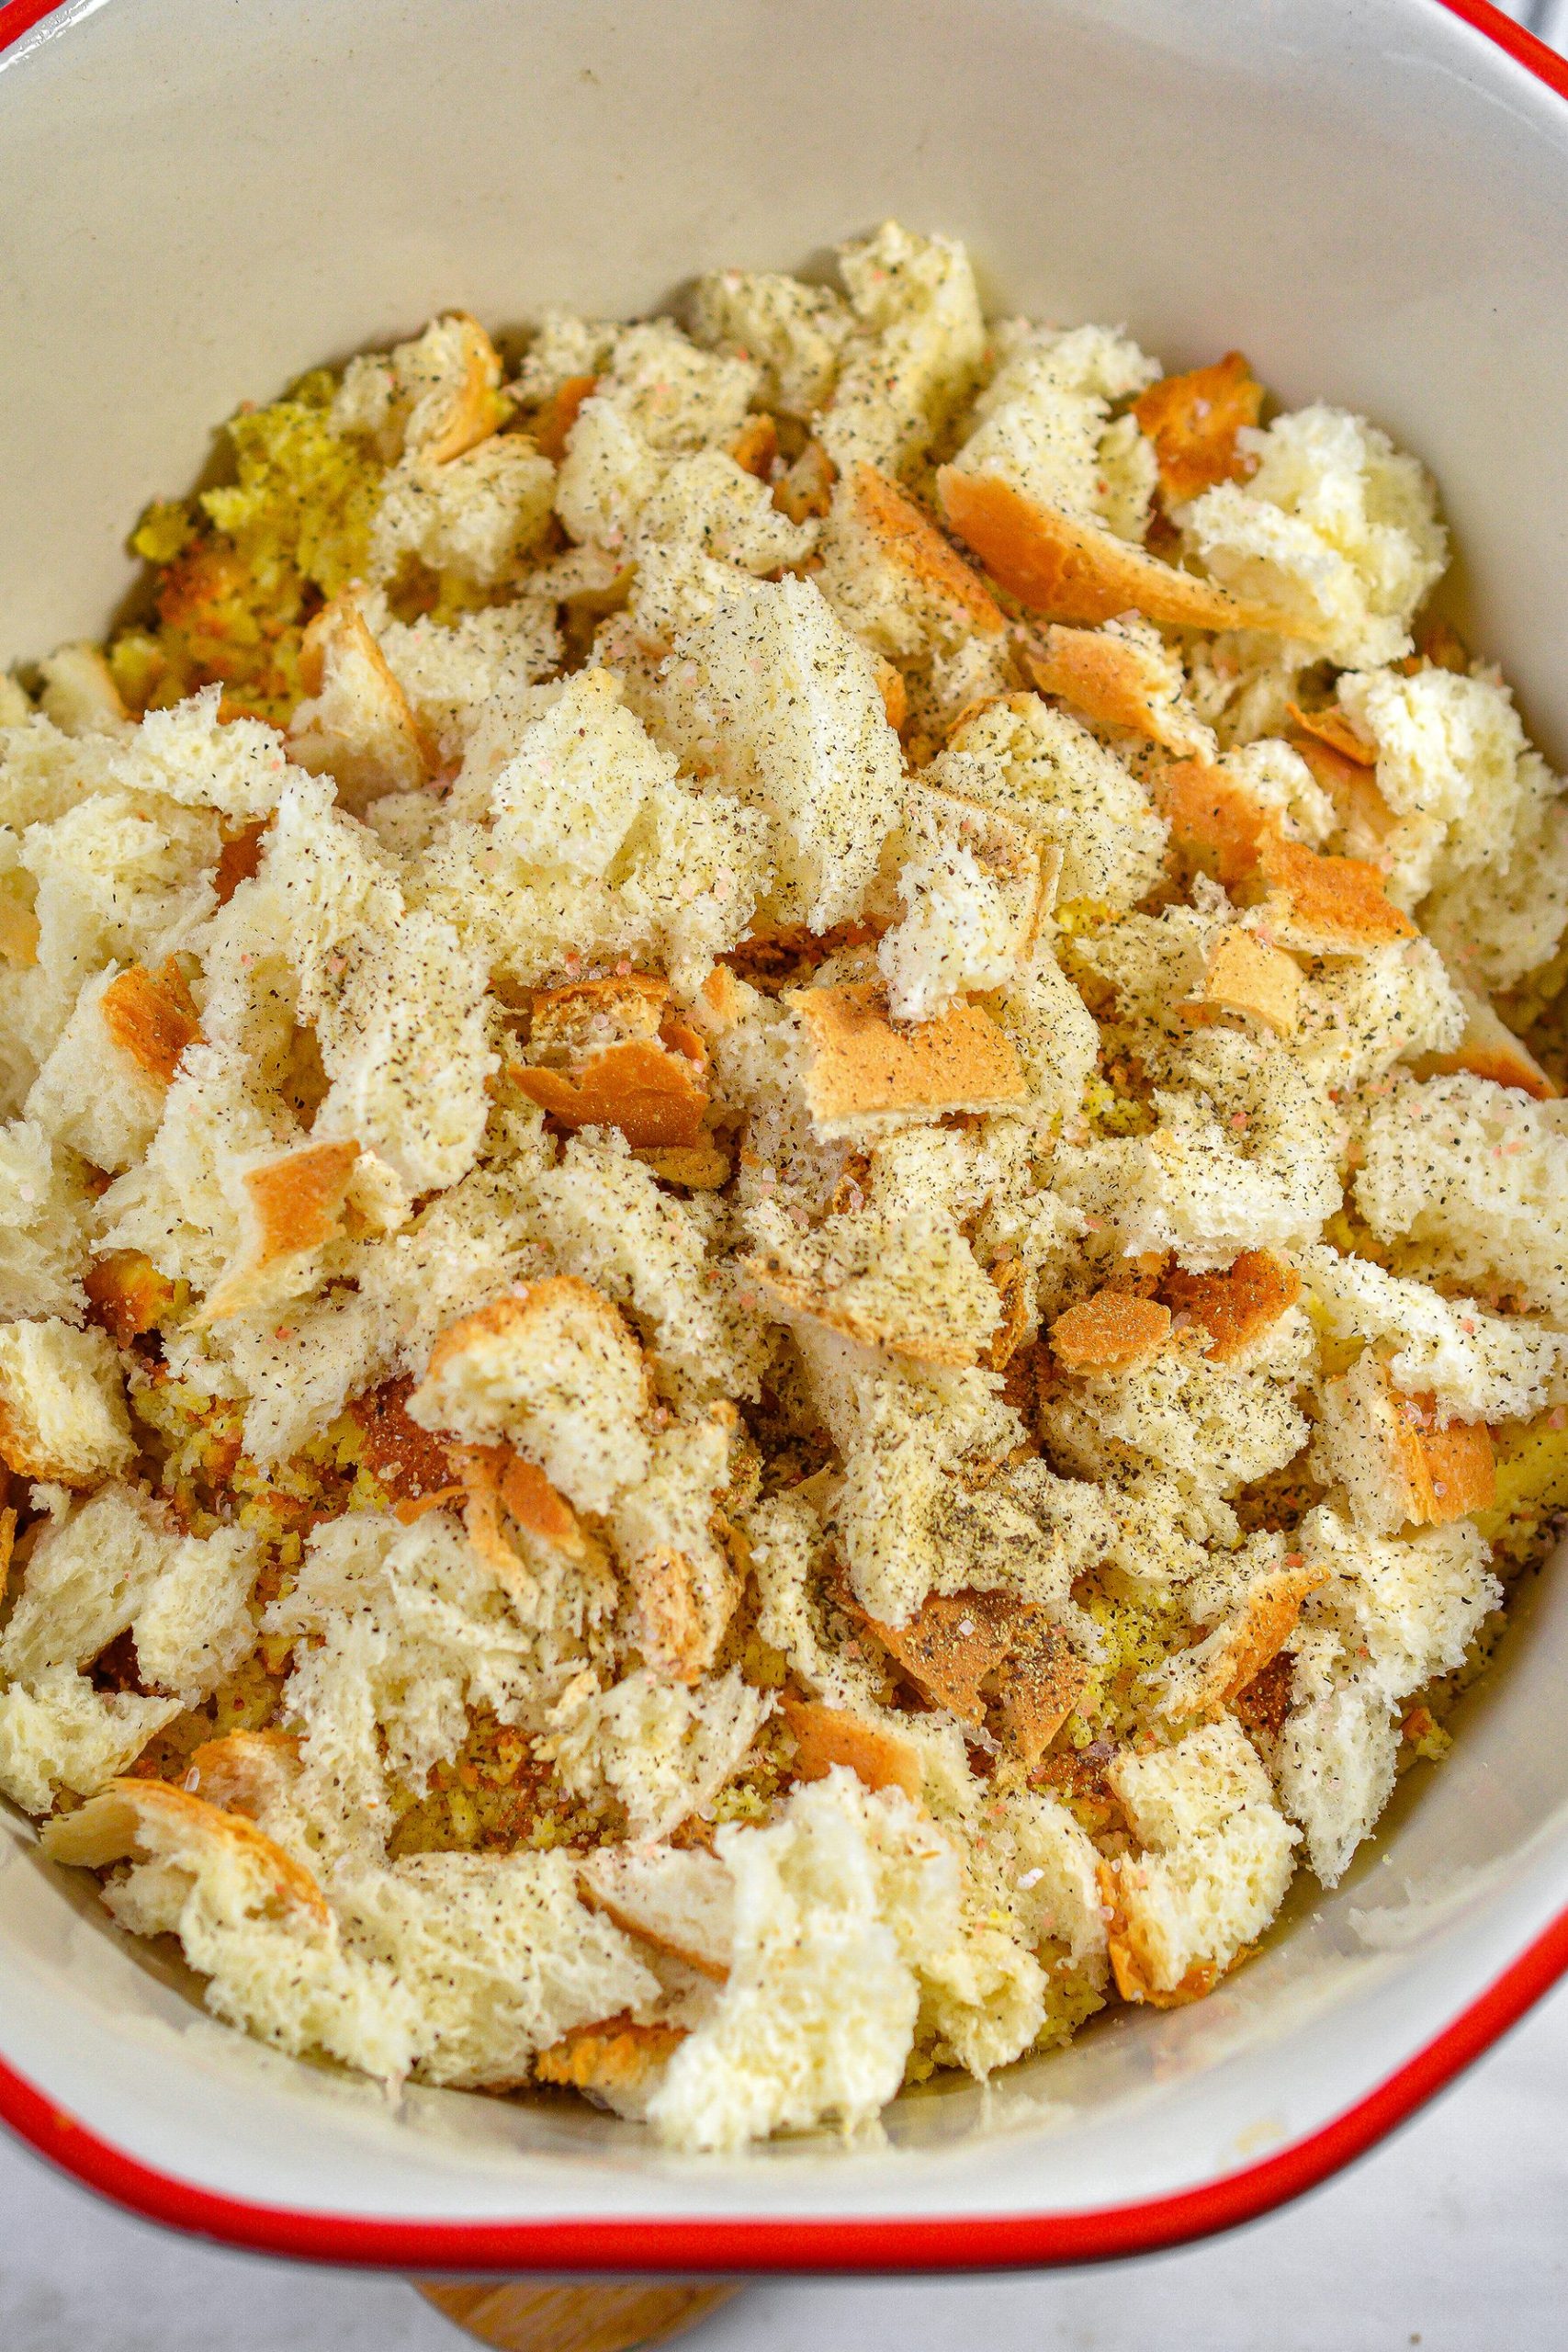 Crumble the cornbread, and place it into a large mixing bowl with the three slices of bread that have been torn into small pieces.